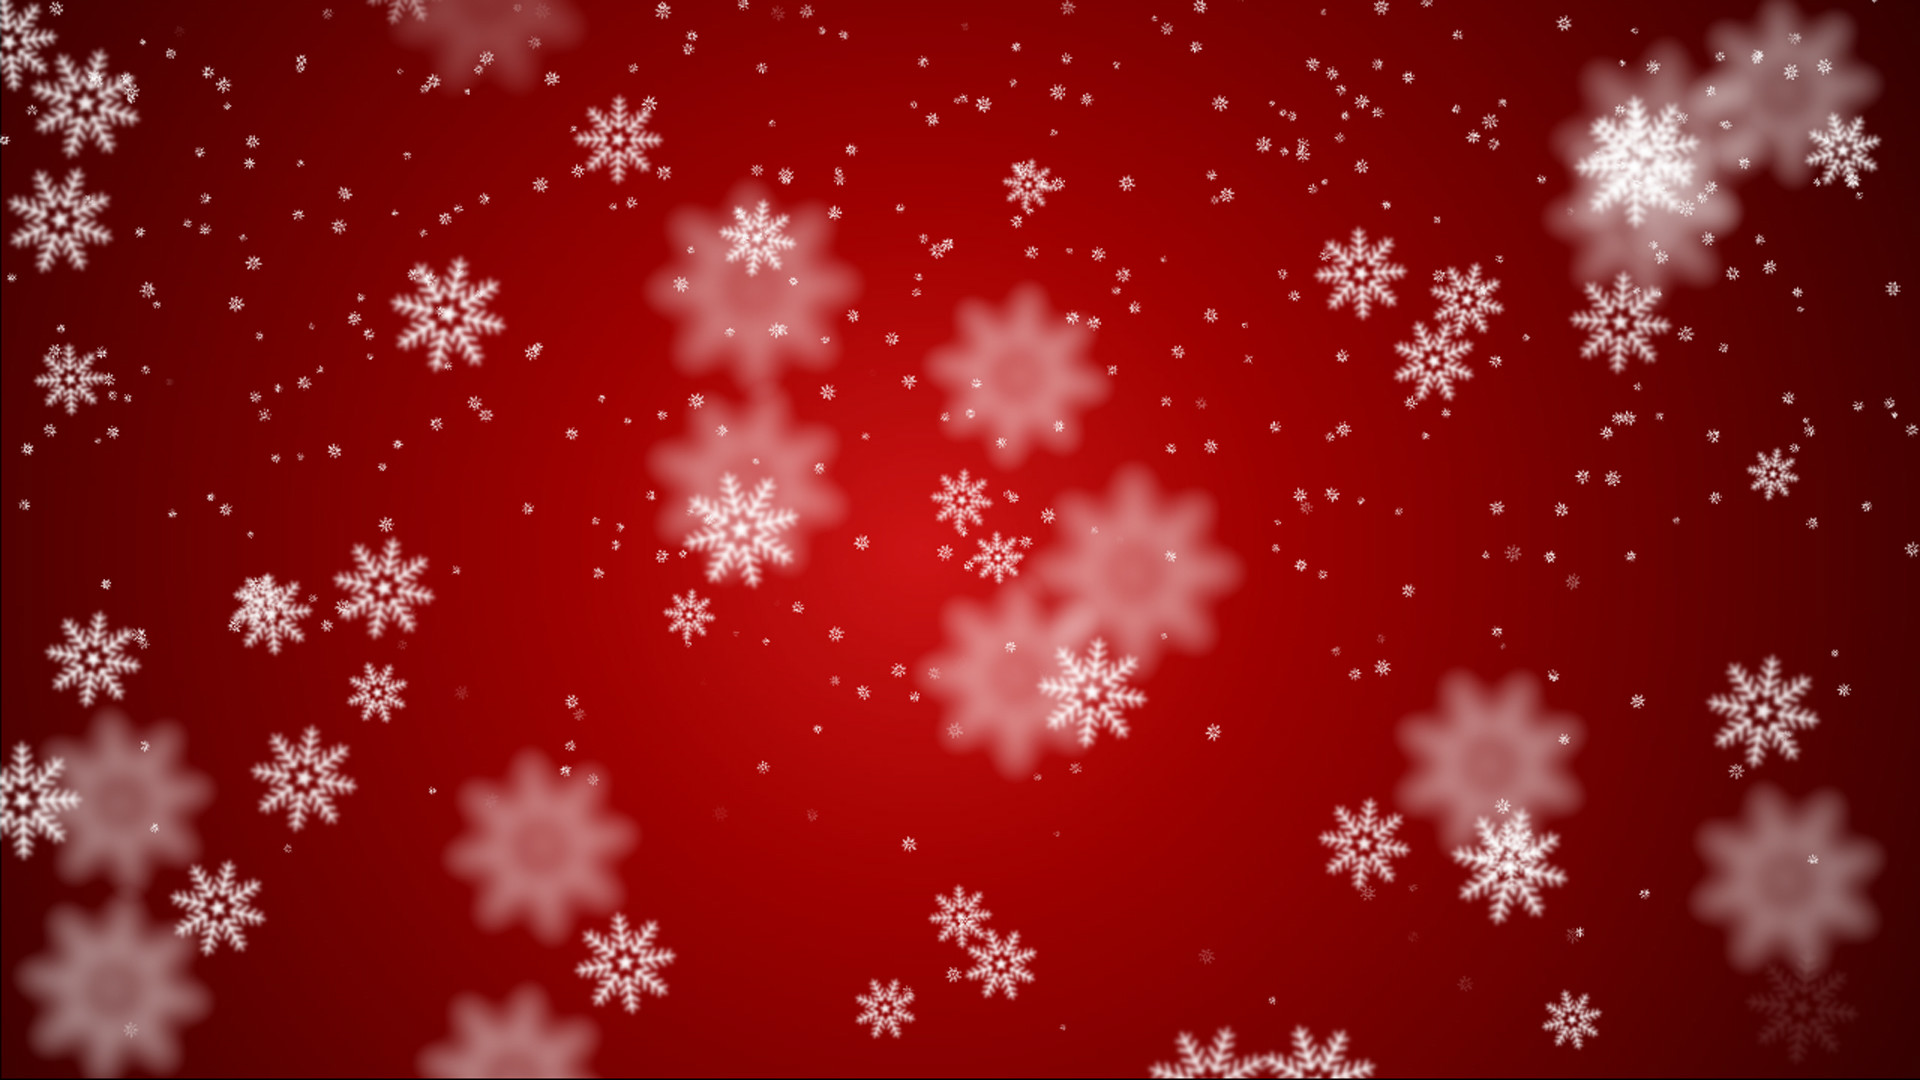 Red Snow Christmas Background (18)